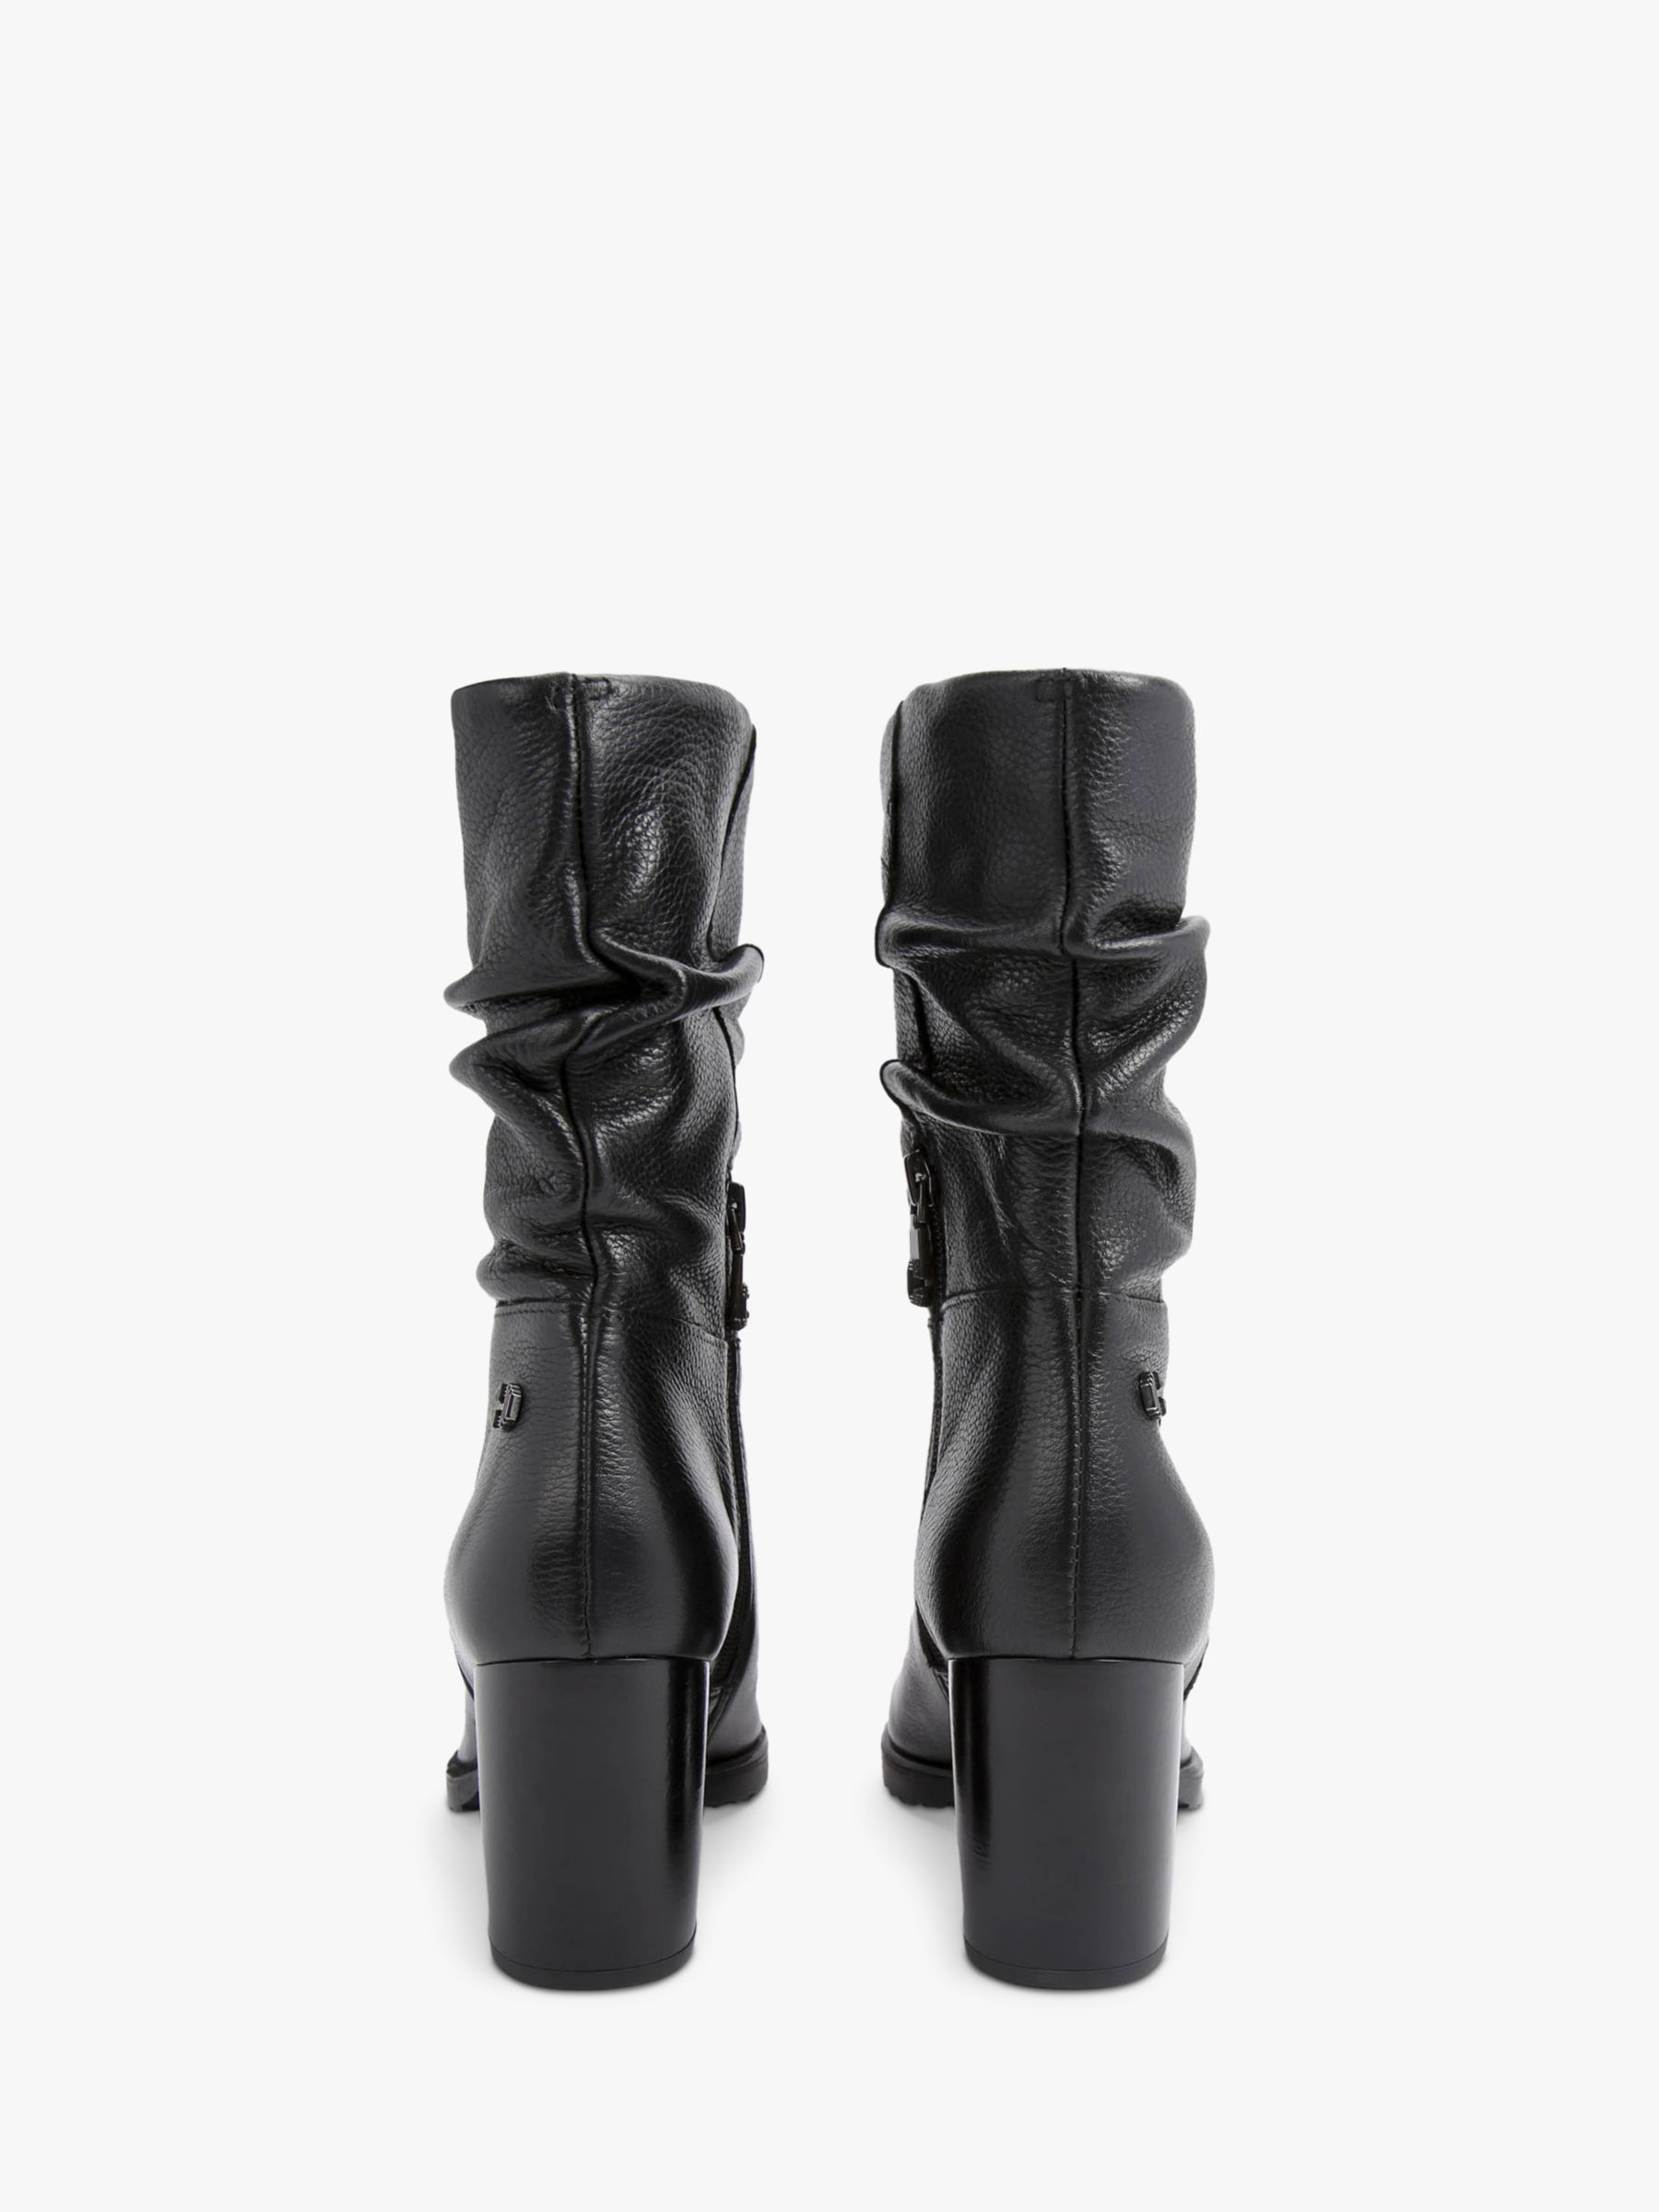 Carvela Slouch Leather Ankle Boots, Black at John Lewis & Partners